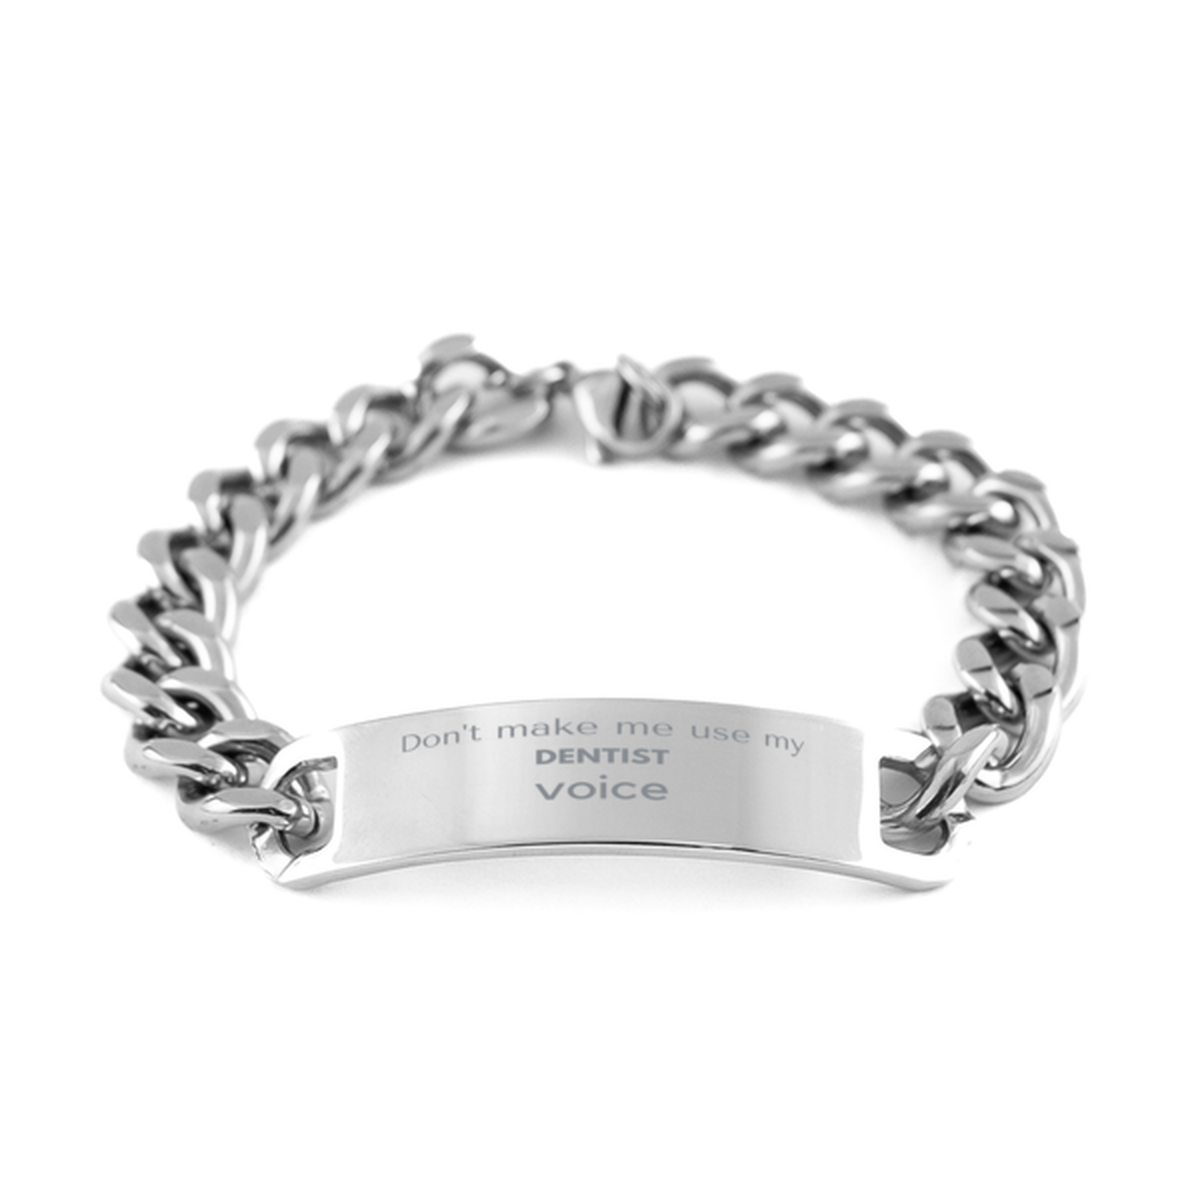 Don't make me use my Dentist voice, Sarcasm Dentist Gifts, Christmas Dentist Cuban Chain Stainless Steel Bracelet Birthday Unique Gifts For Dentist Coworkers, Men, Women, Colleague, Friends